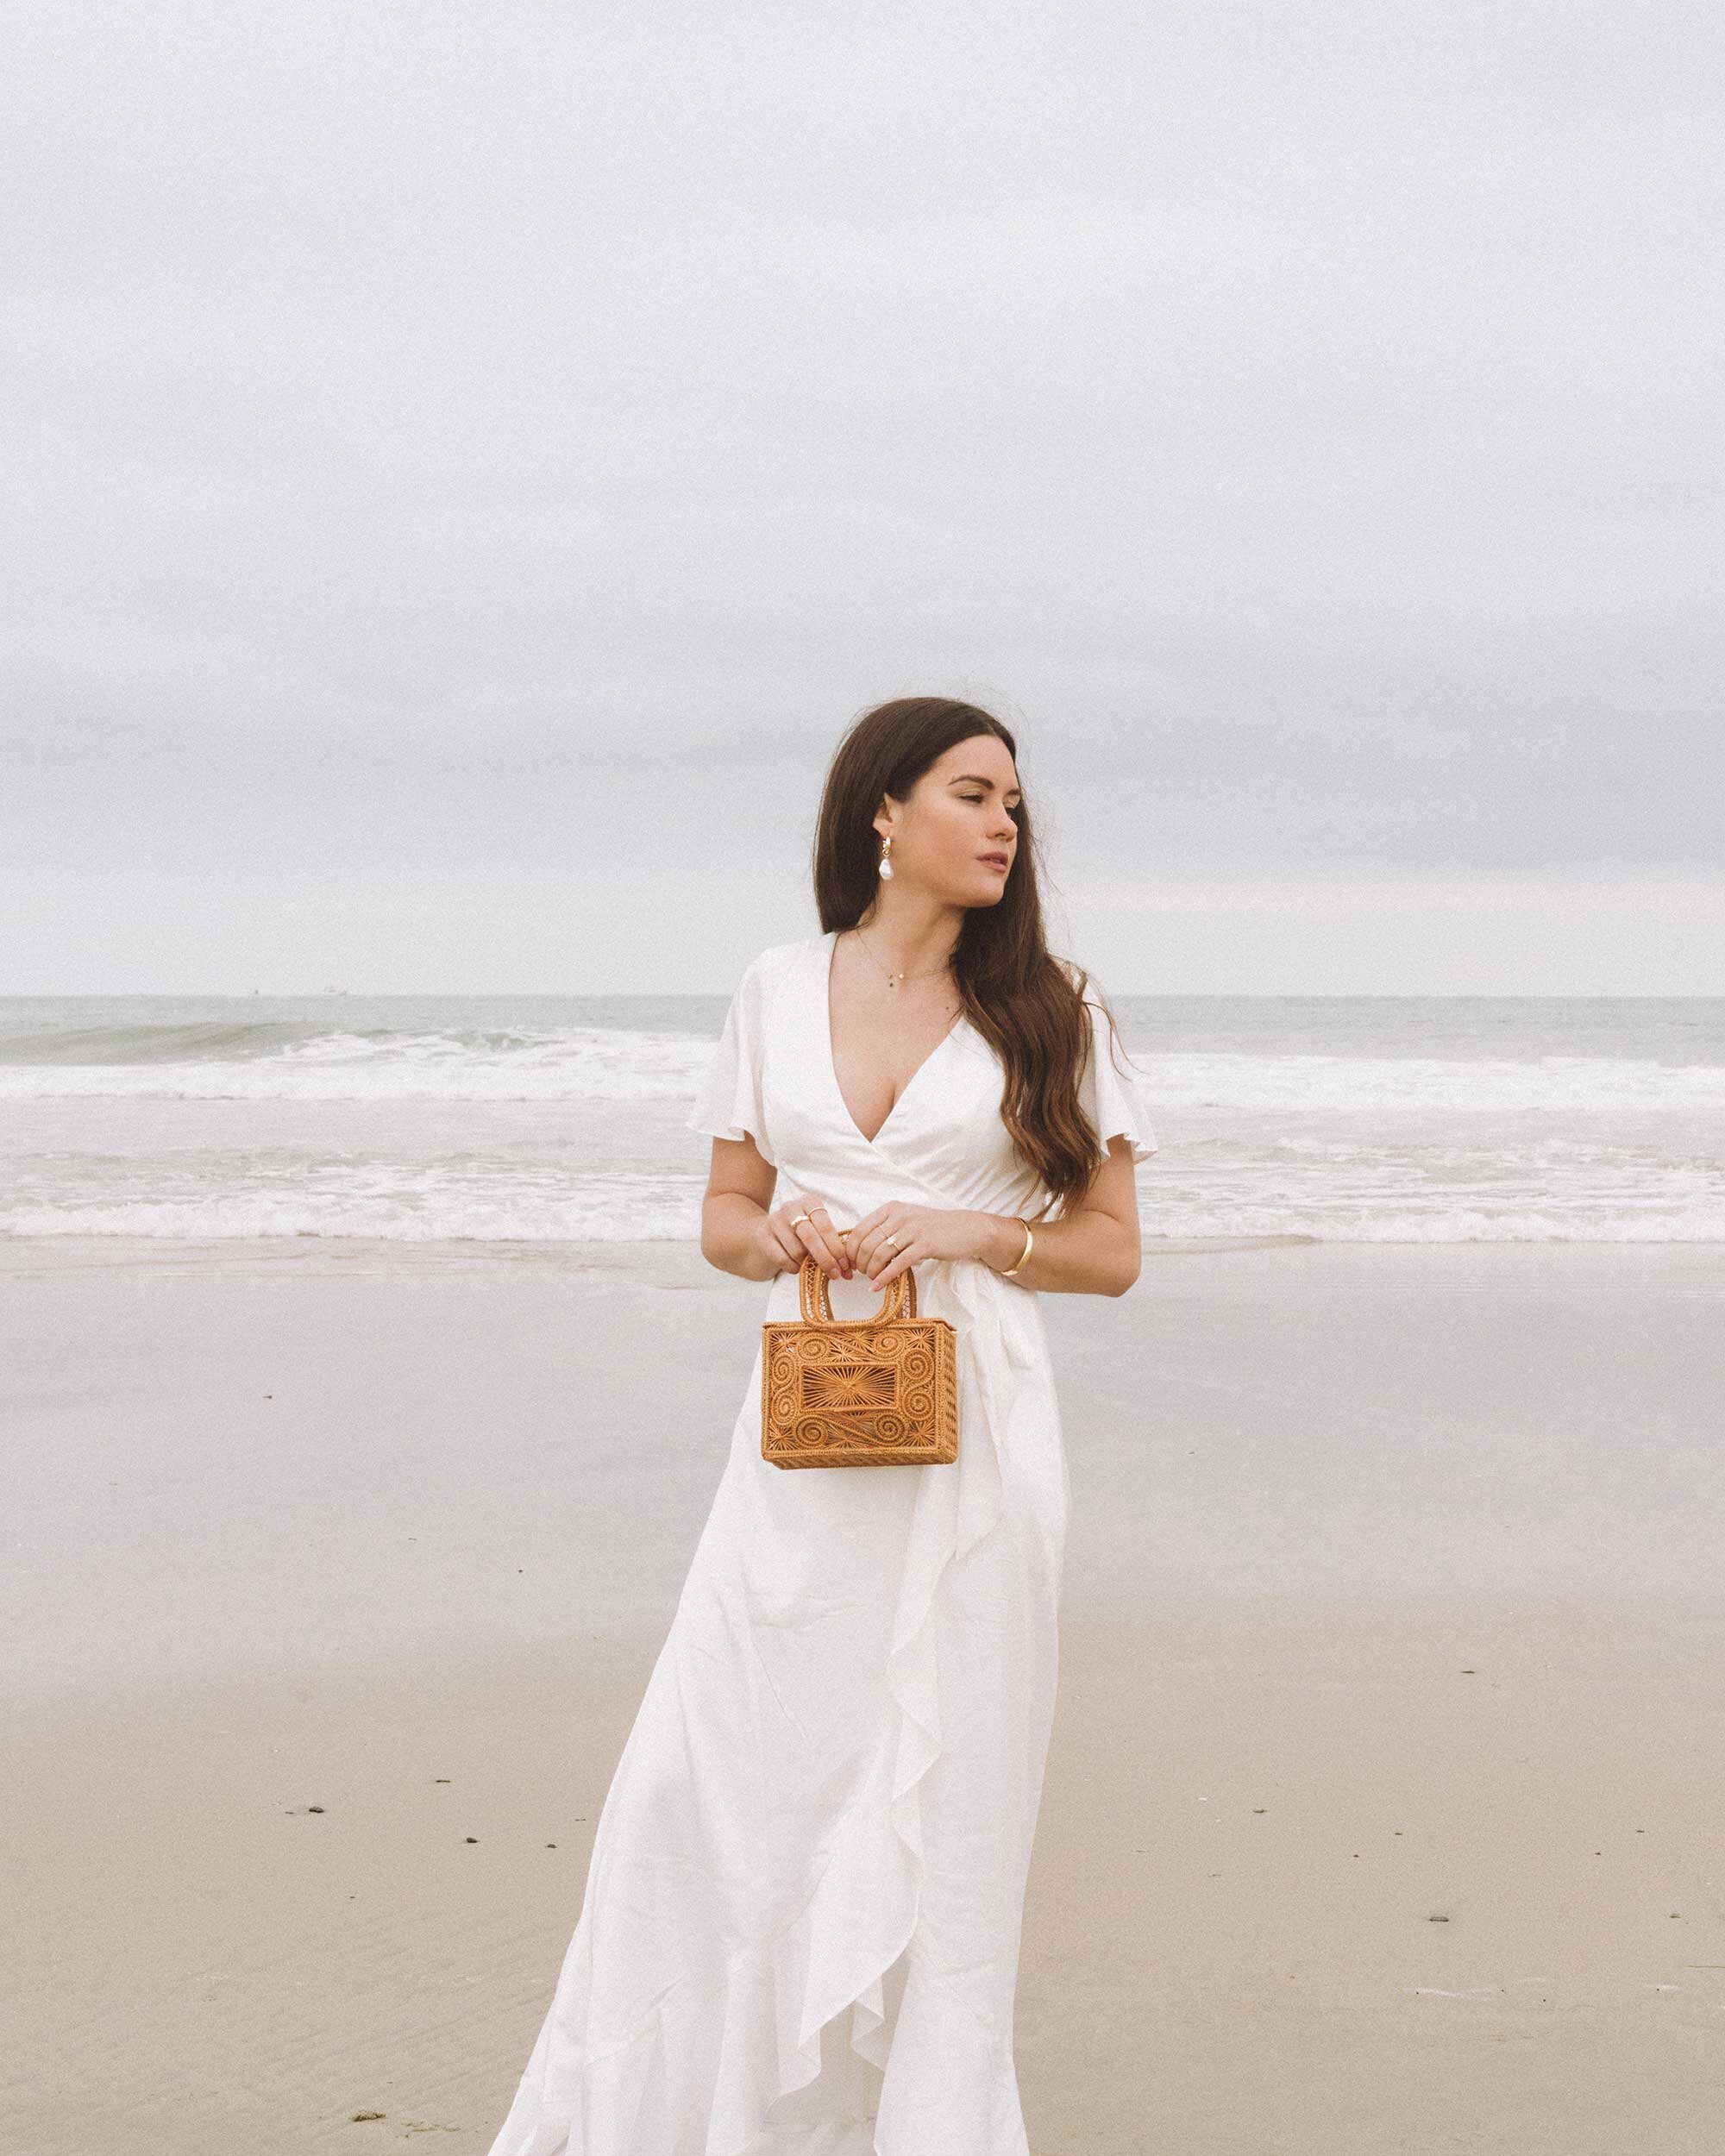 Chic white dresses for spring. Sarah Butler of @sarahchristine wearing  Charmeuse Ruffle Mini Dress with Back Tie and Flutter Sleeve Stretch Satin Dress with Ruffle Hem in Newport Beach, California -7.jpg